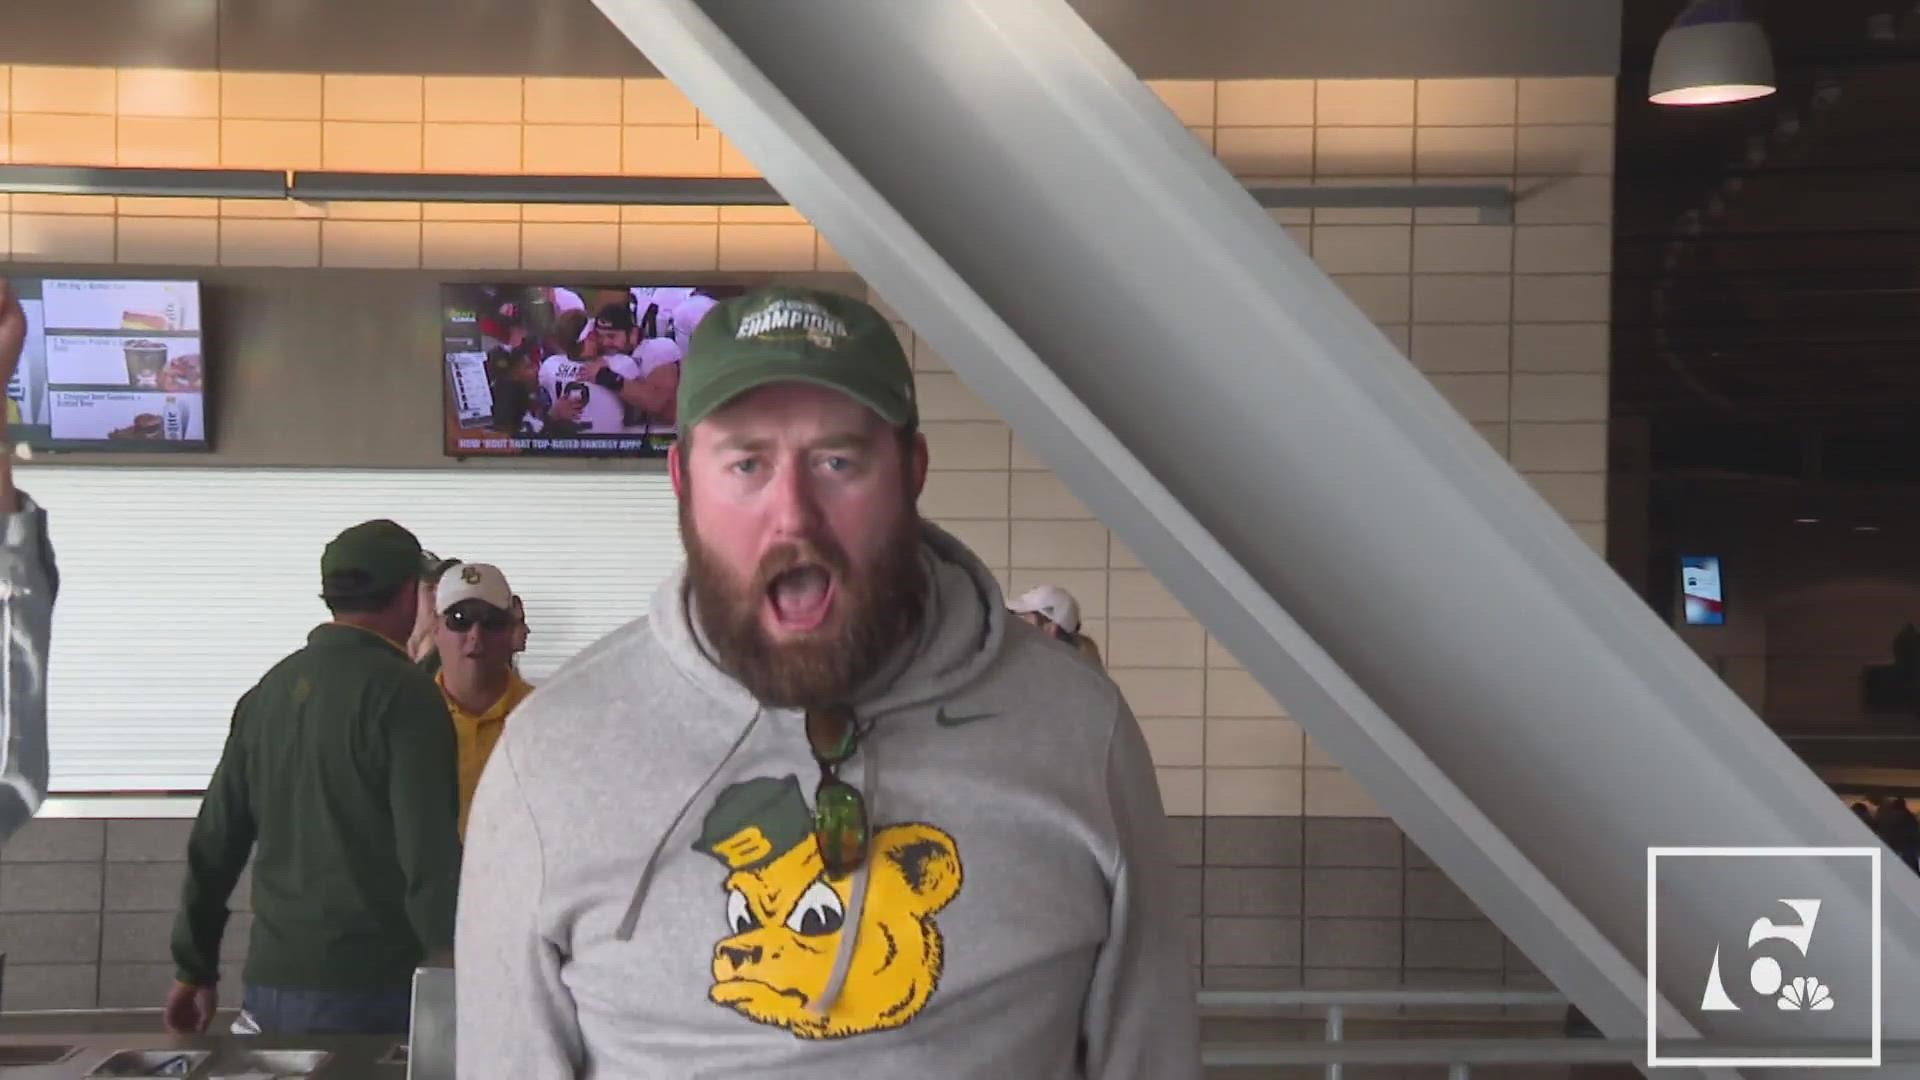 Baylor fans are excited after the Bears win over Oklahoma State